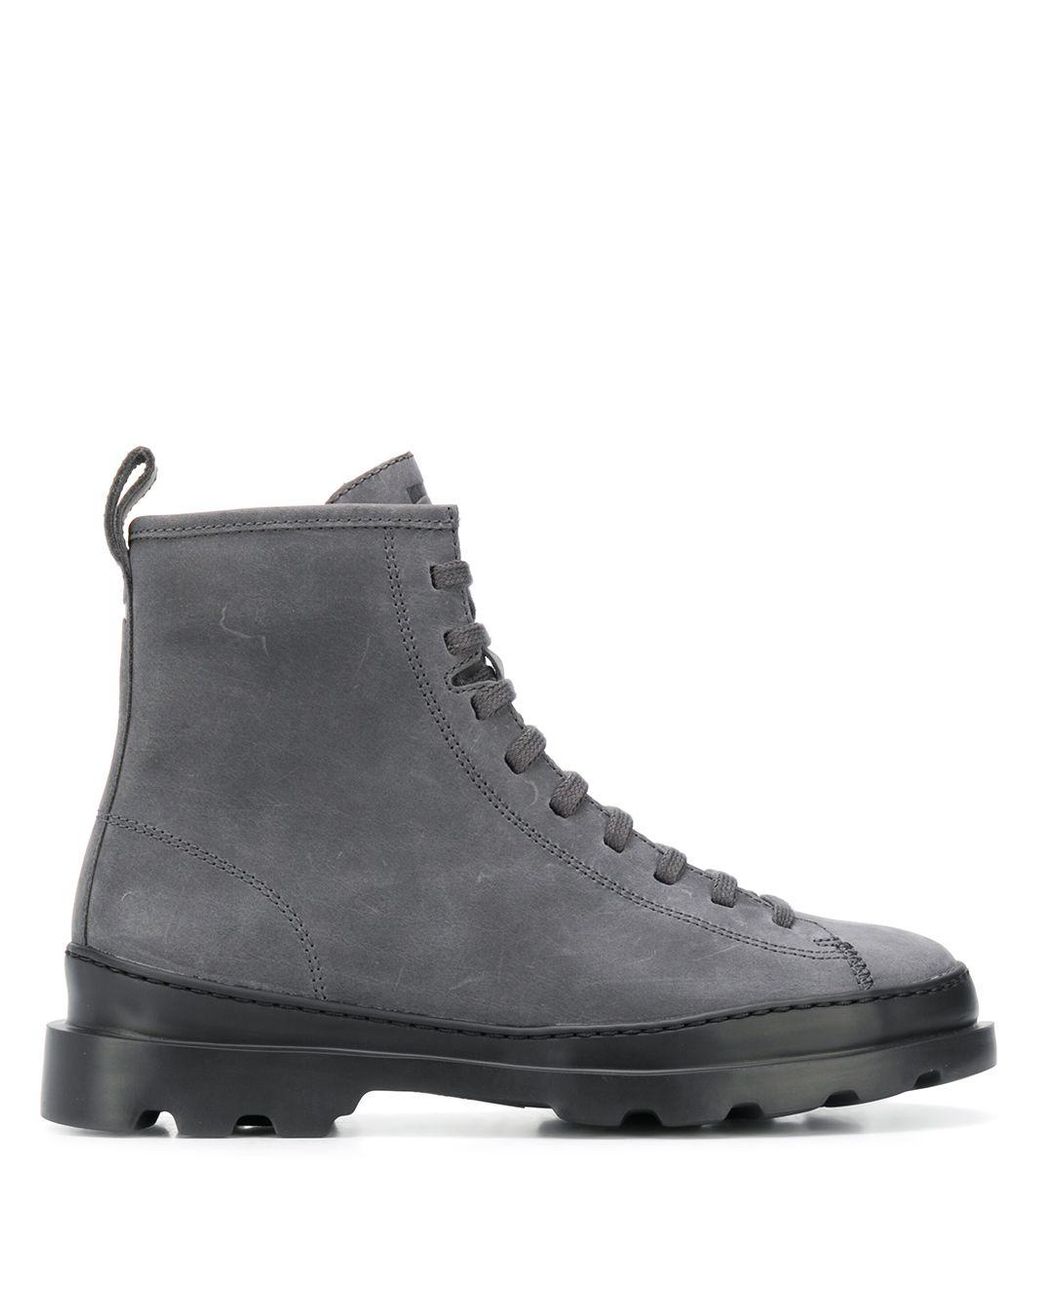 Camper Leather Brutus Ankle Boots in Grey (Gray) - Lyst